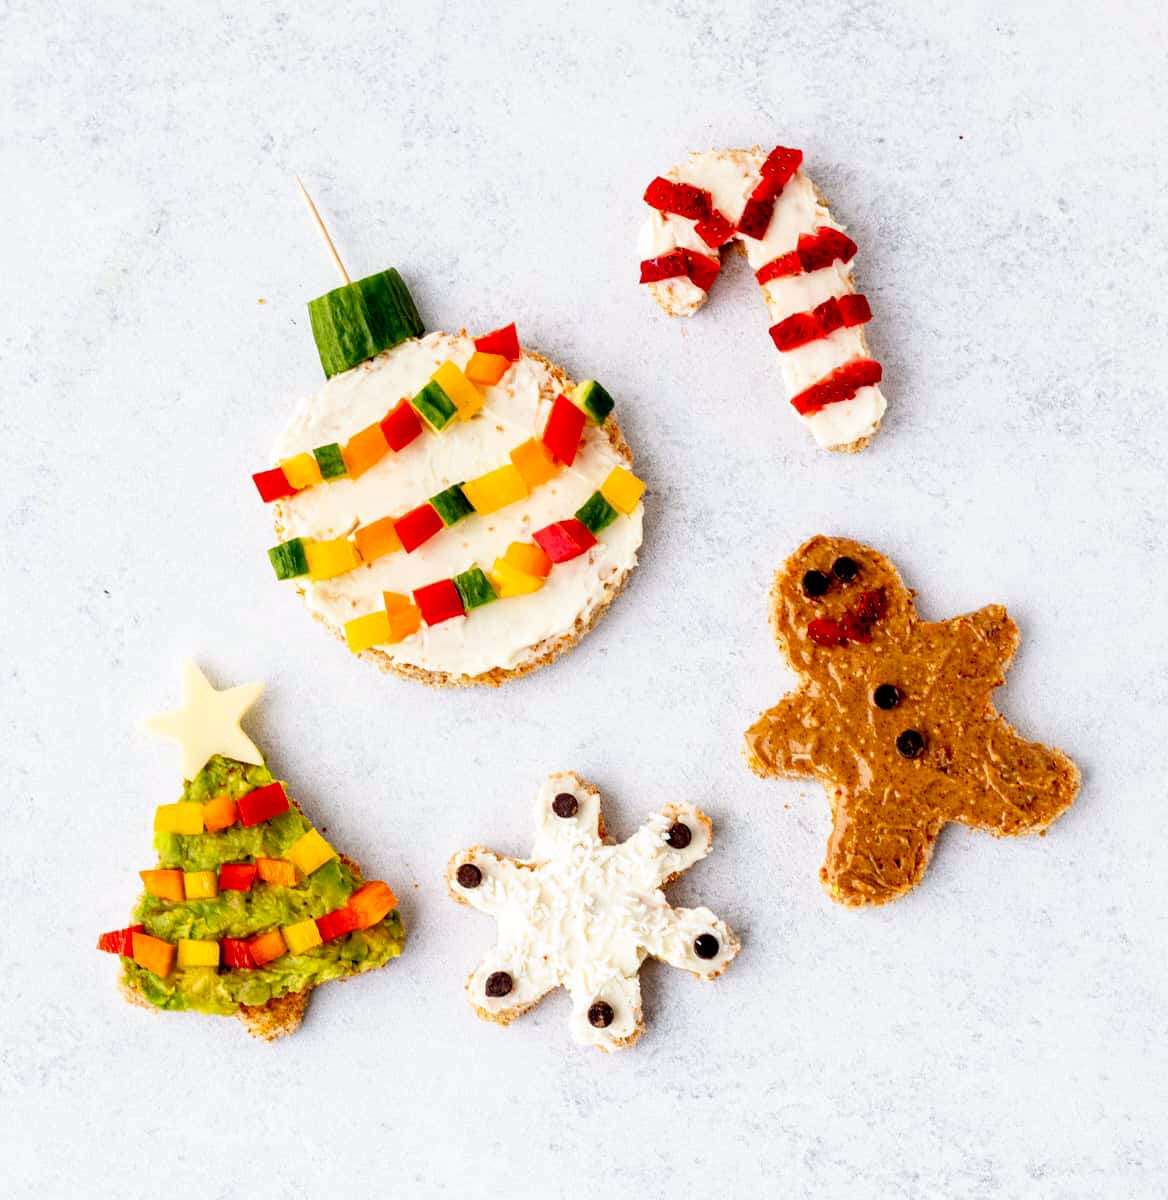 5 different holiday toast ideas: an ornament, candy cane, gingerbread man, snowflake and Christmas tree.